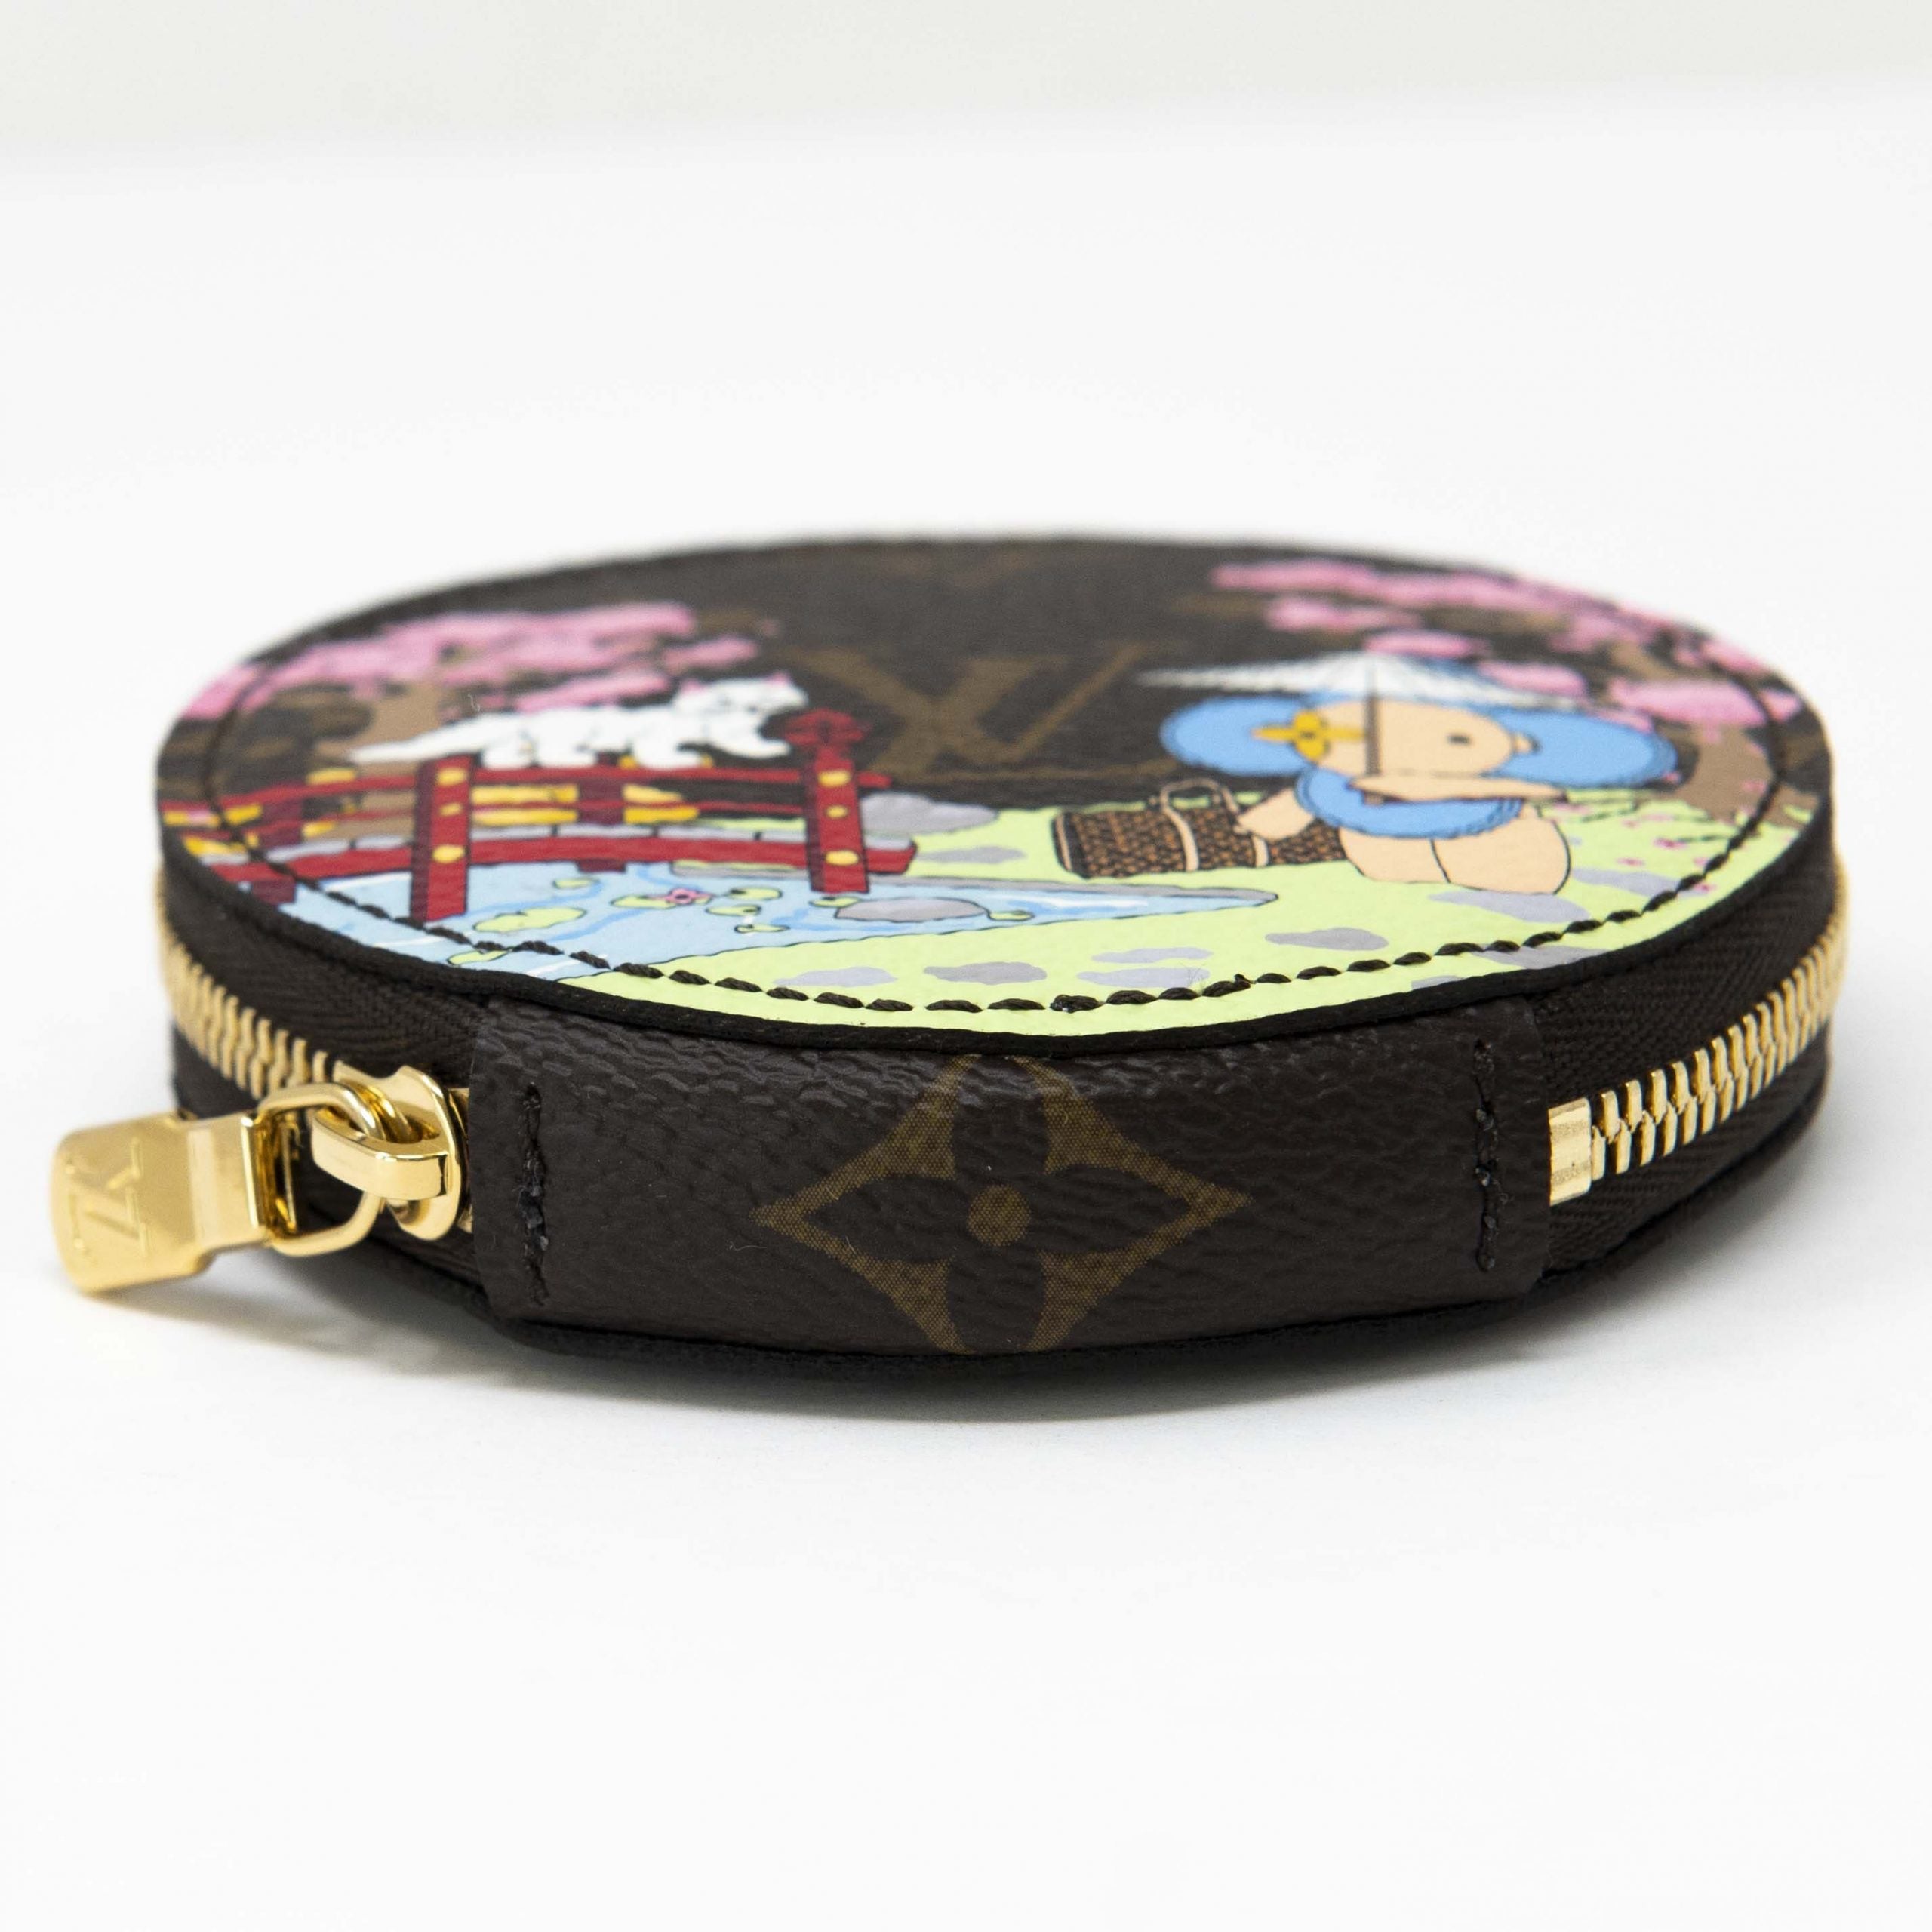 LOUIS VUITTON Nylon Strap with Monogram Round Coin Purse Other Accesso